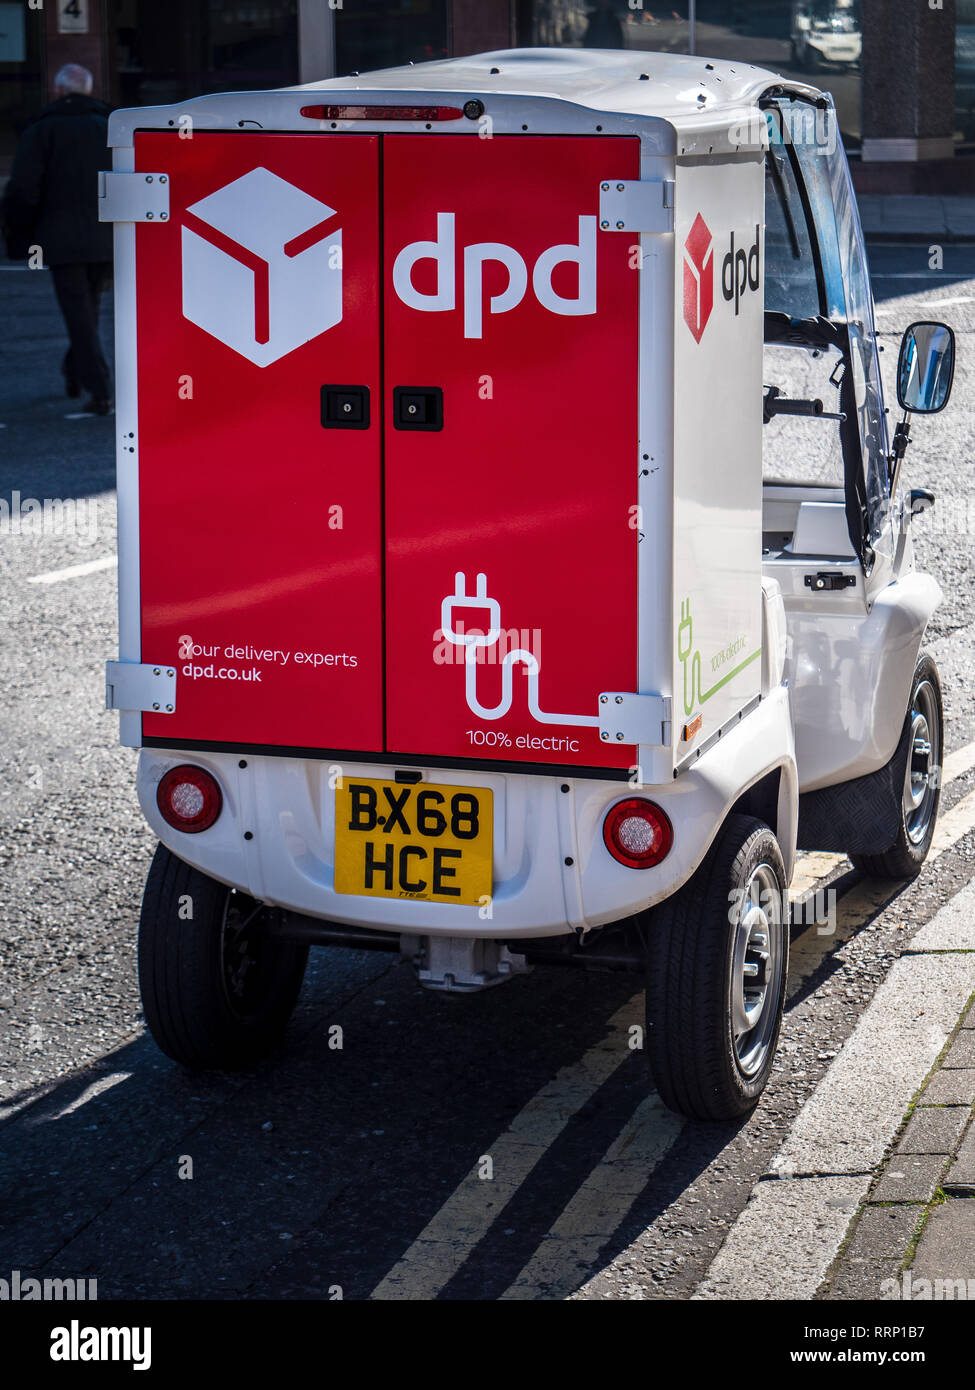 DPD Electric Delivery Vehicle in Central London. DPD ist ein Liefer- und Kurierdienst. Eco Delivery London. Stockfoto